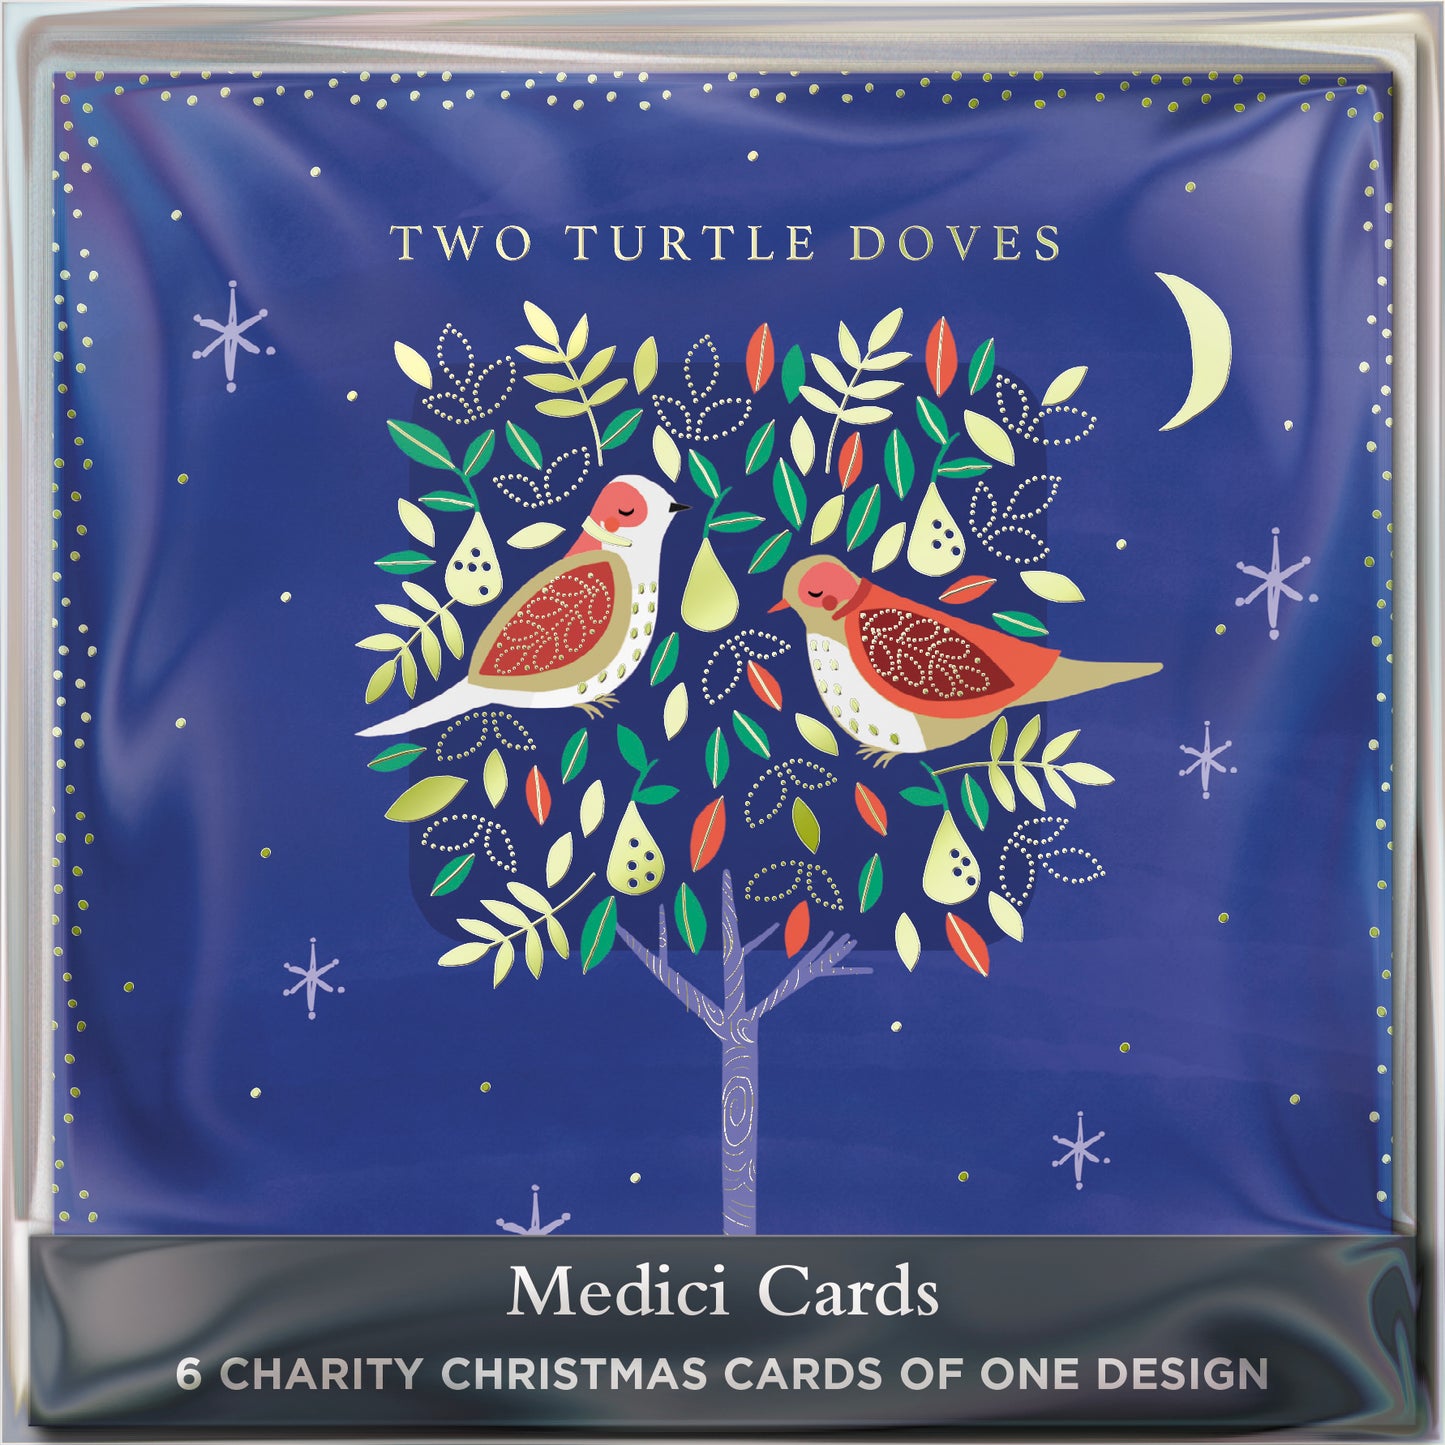 Pack of 6 Two Turtle Doves Charity Christmas Cards